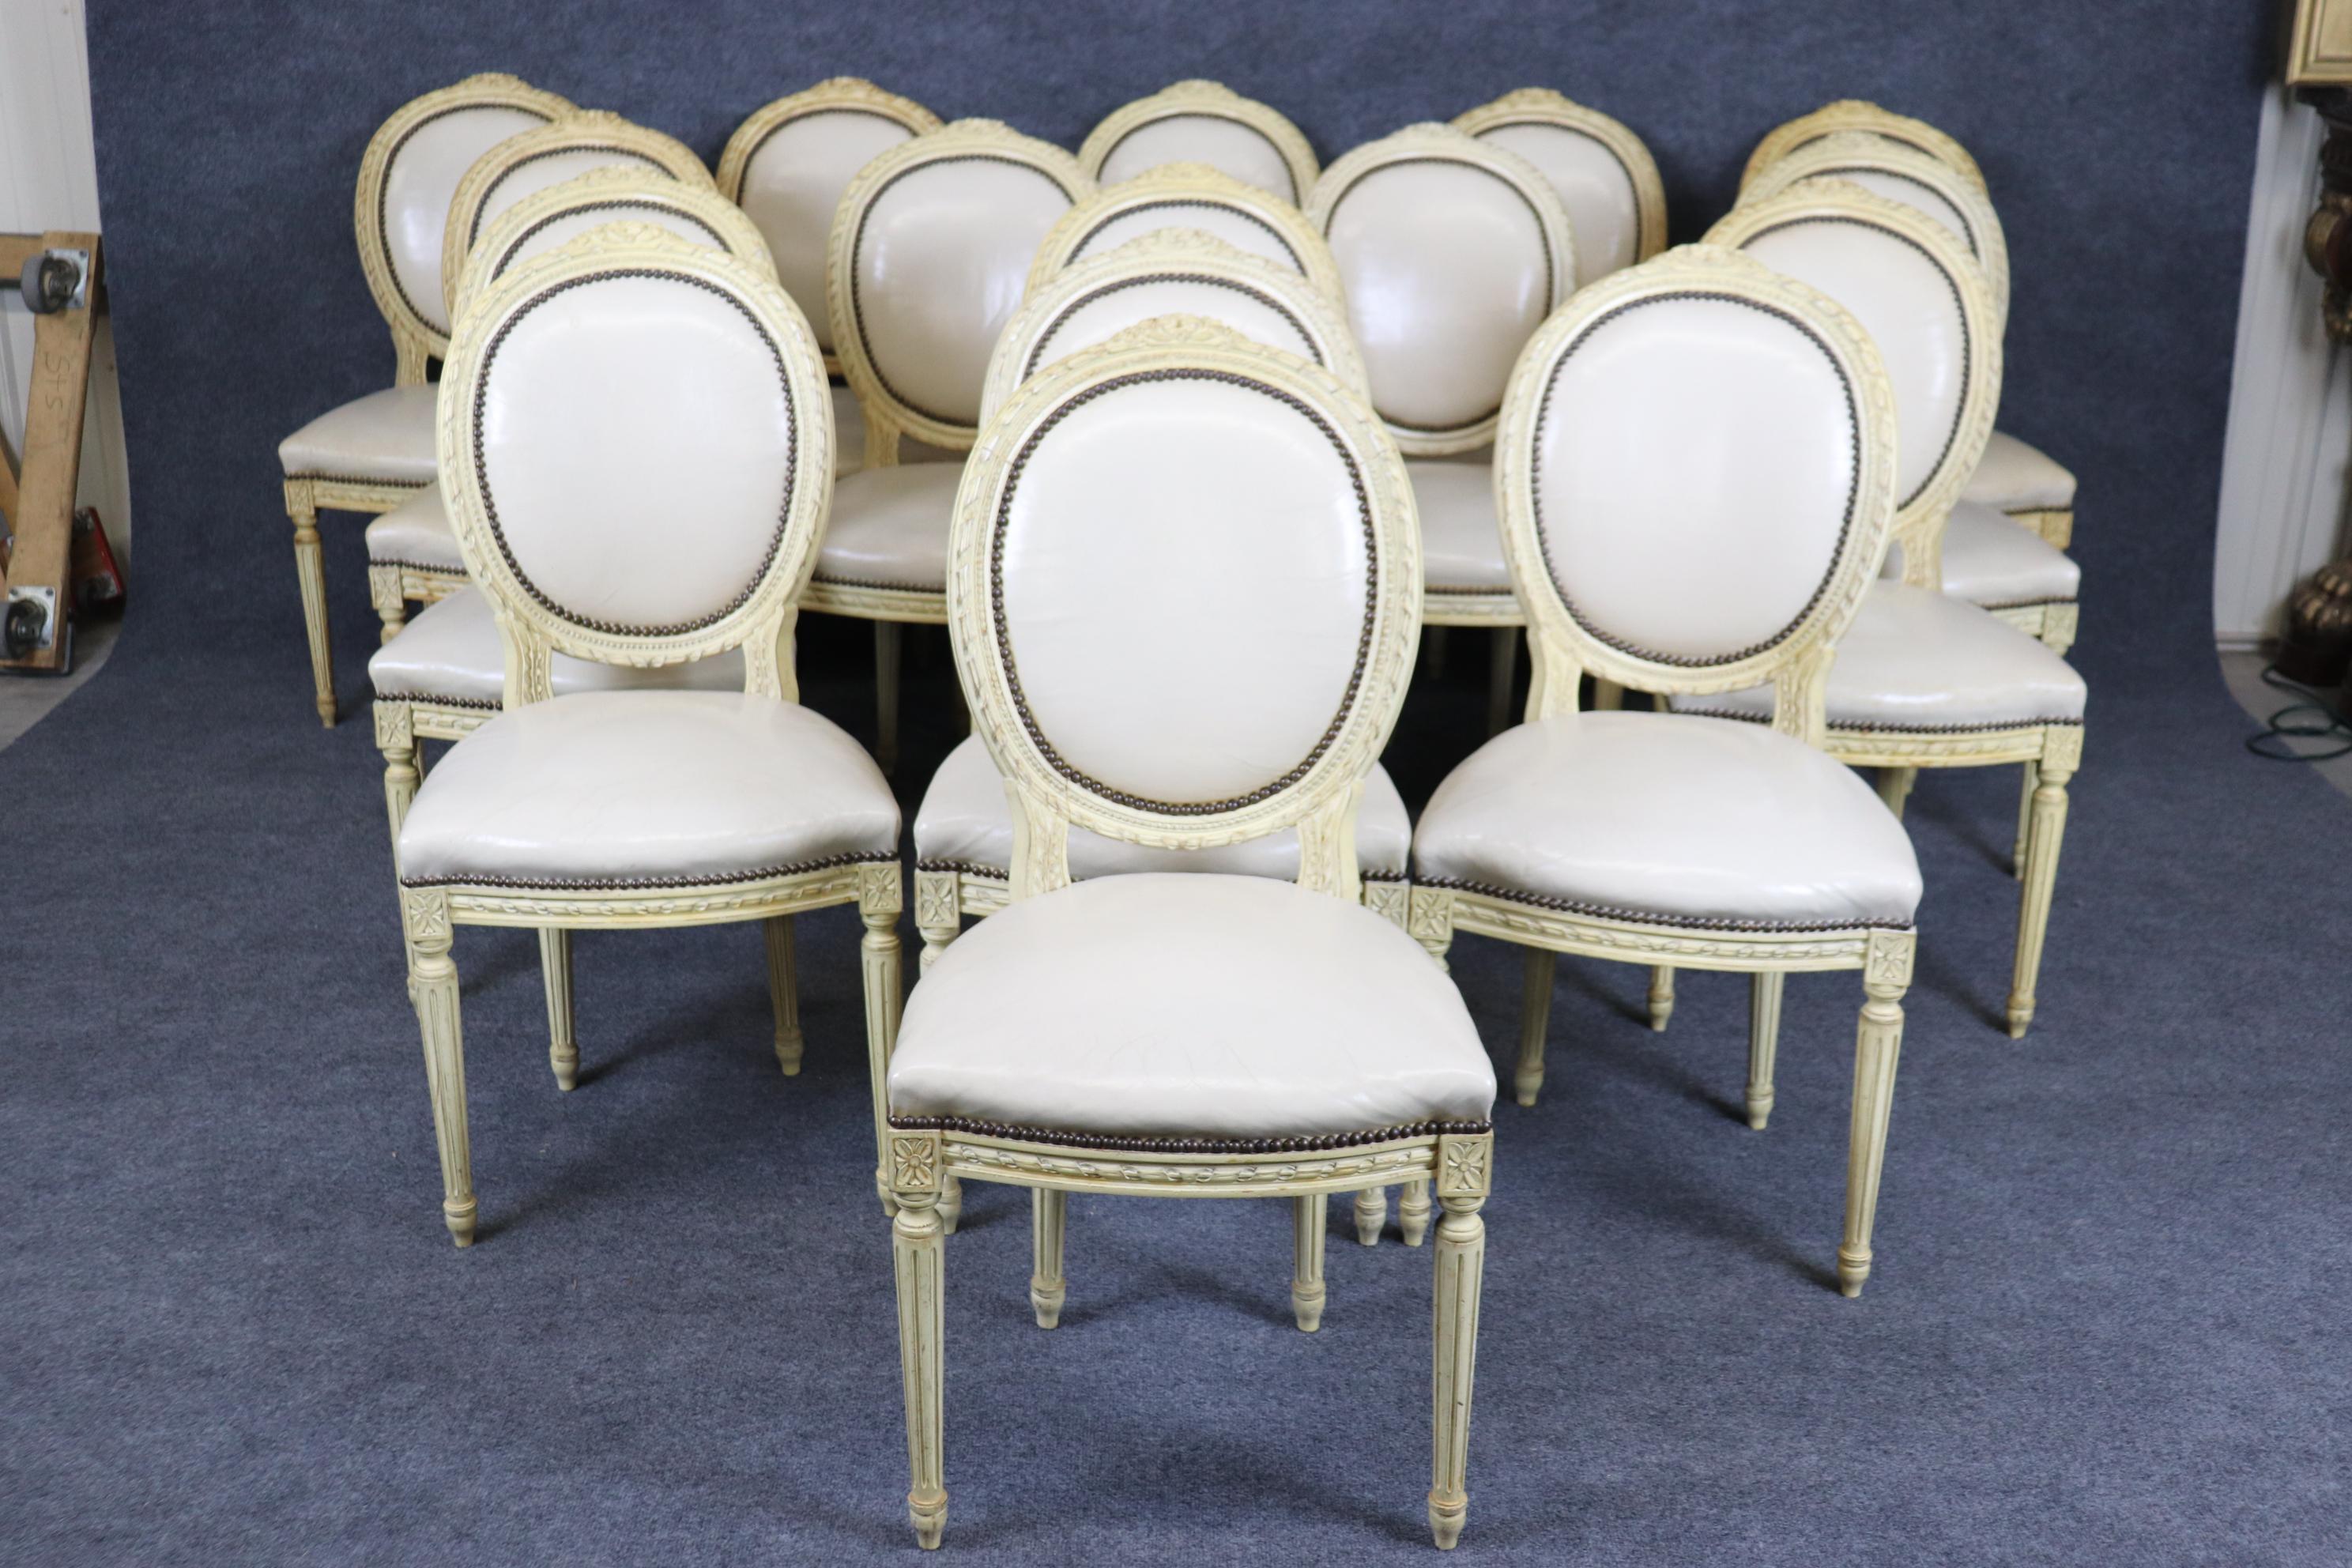 This is a spectacular set of 16 French carved creme painted dining chairs. The chairs in an antique white or creme finish and has a leather or perhaps faux leather upholstery. The upholstery as the chair frames will show signs of use and wear but is